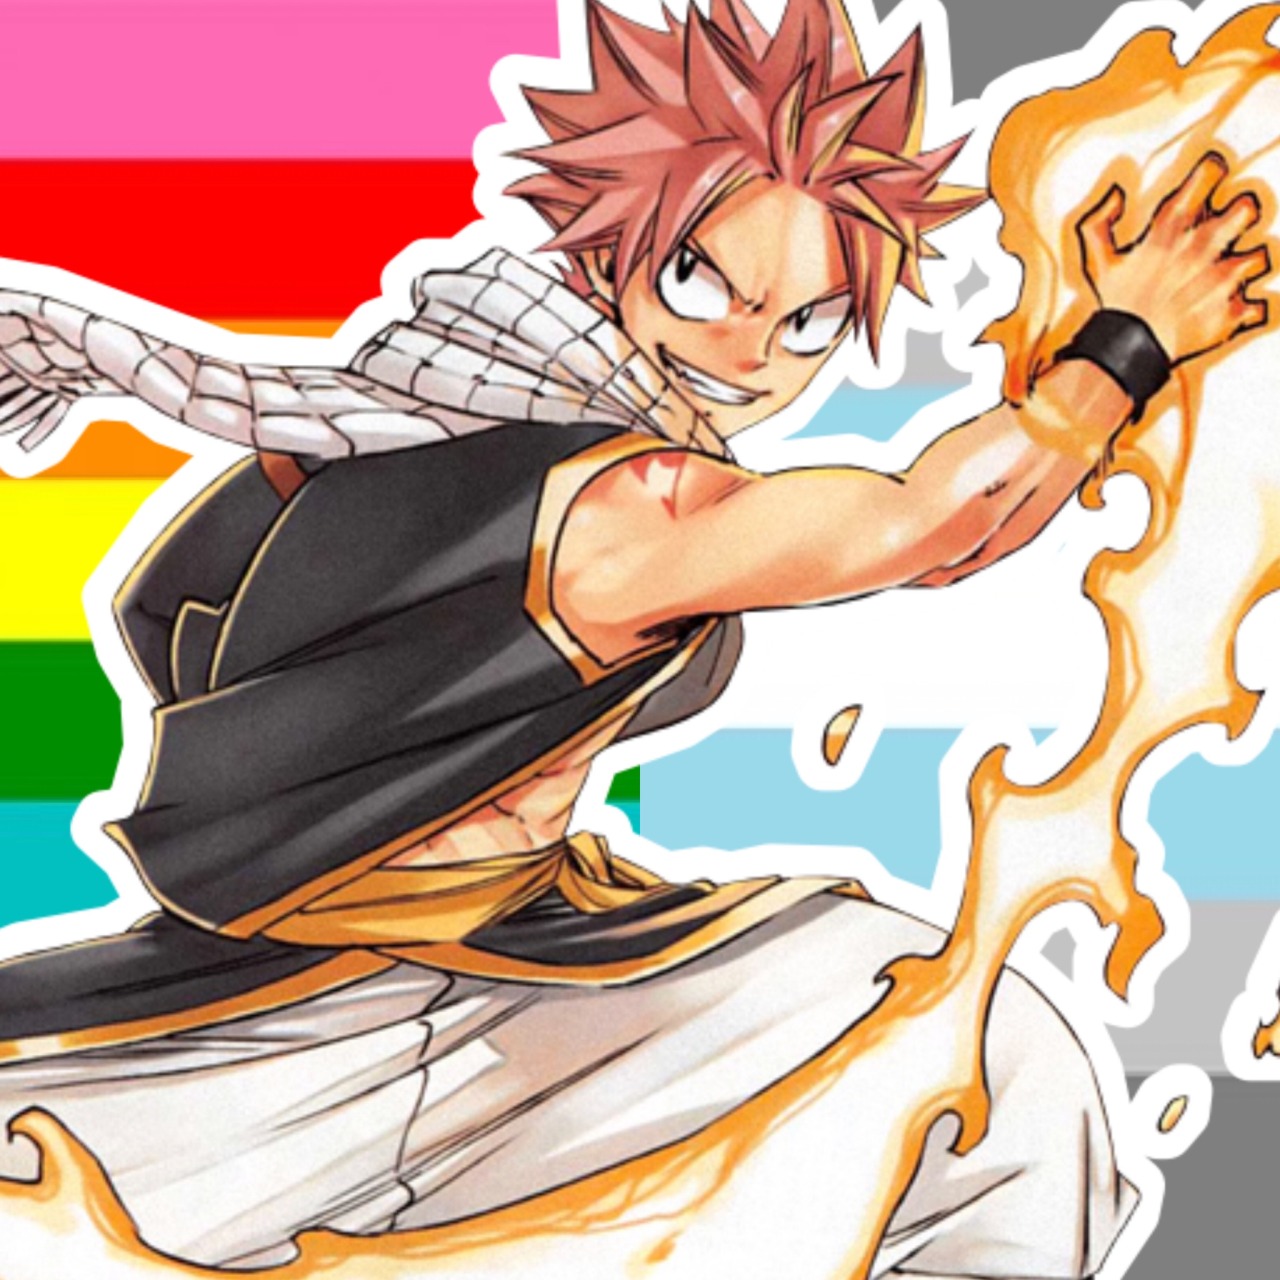 fairy tail gay sex fanfiction